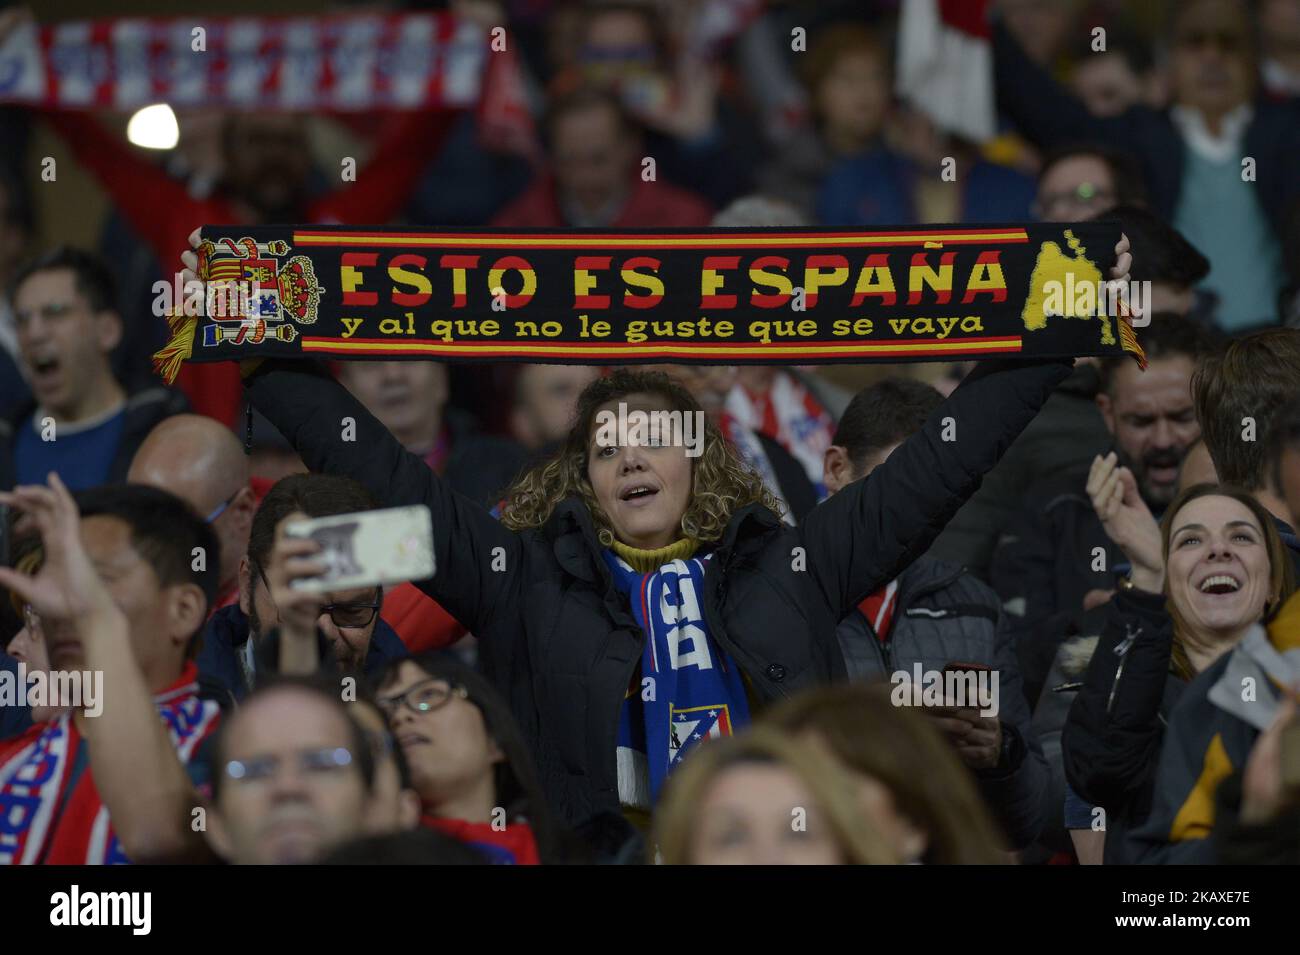 A fan of Atletico de Madrid during a match between Atletico de Madrid vs Sporting Club de Portugal for the UEFA Europa League quarter final at Wanda Metropolitano Stadium on April 5, 2018 in Madrid, Spain. (Photo by Patricio Realpe/ChakanaNews) Stock Photo